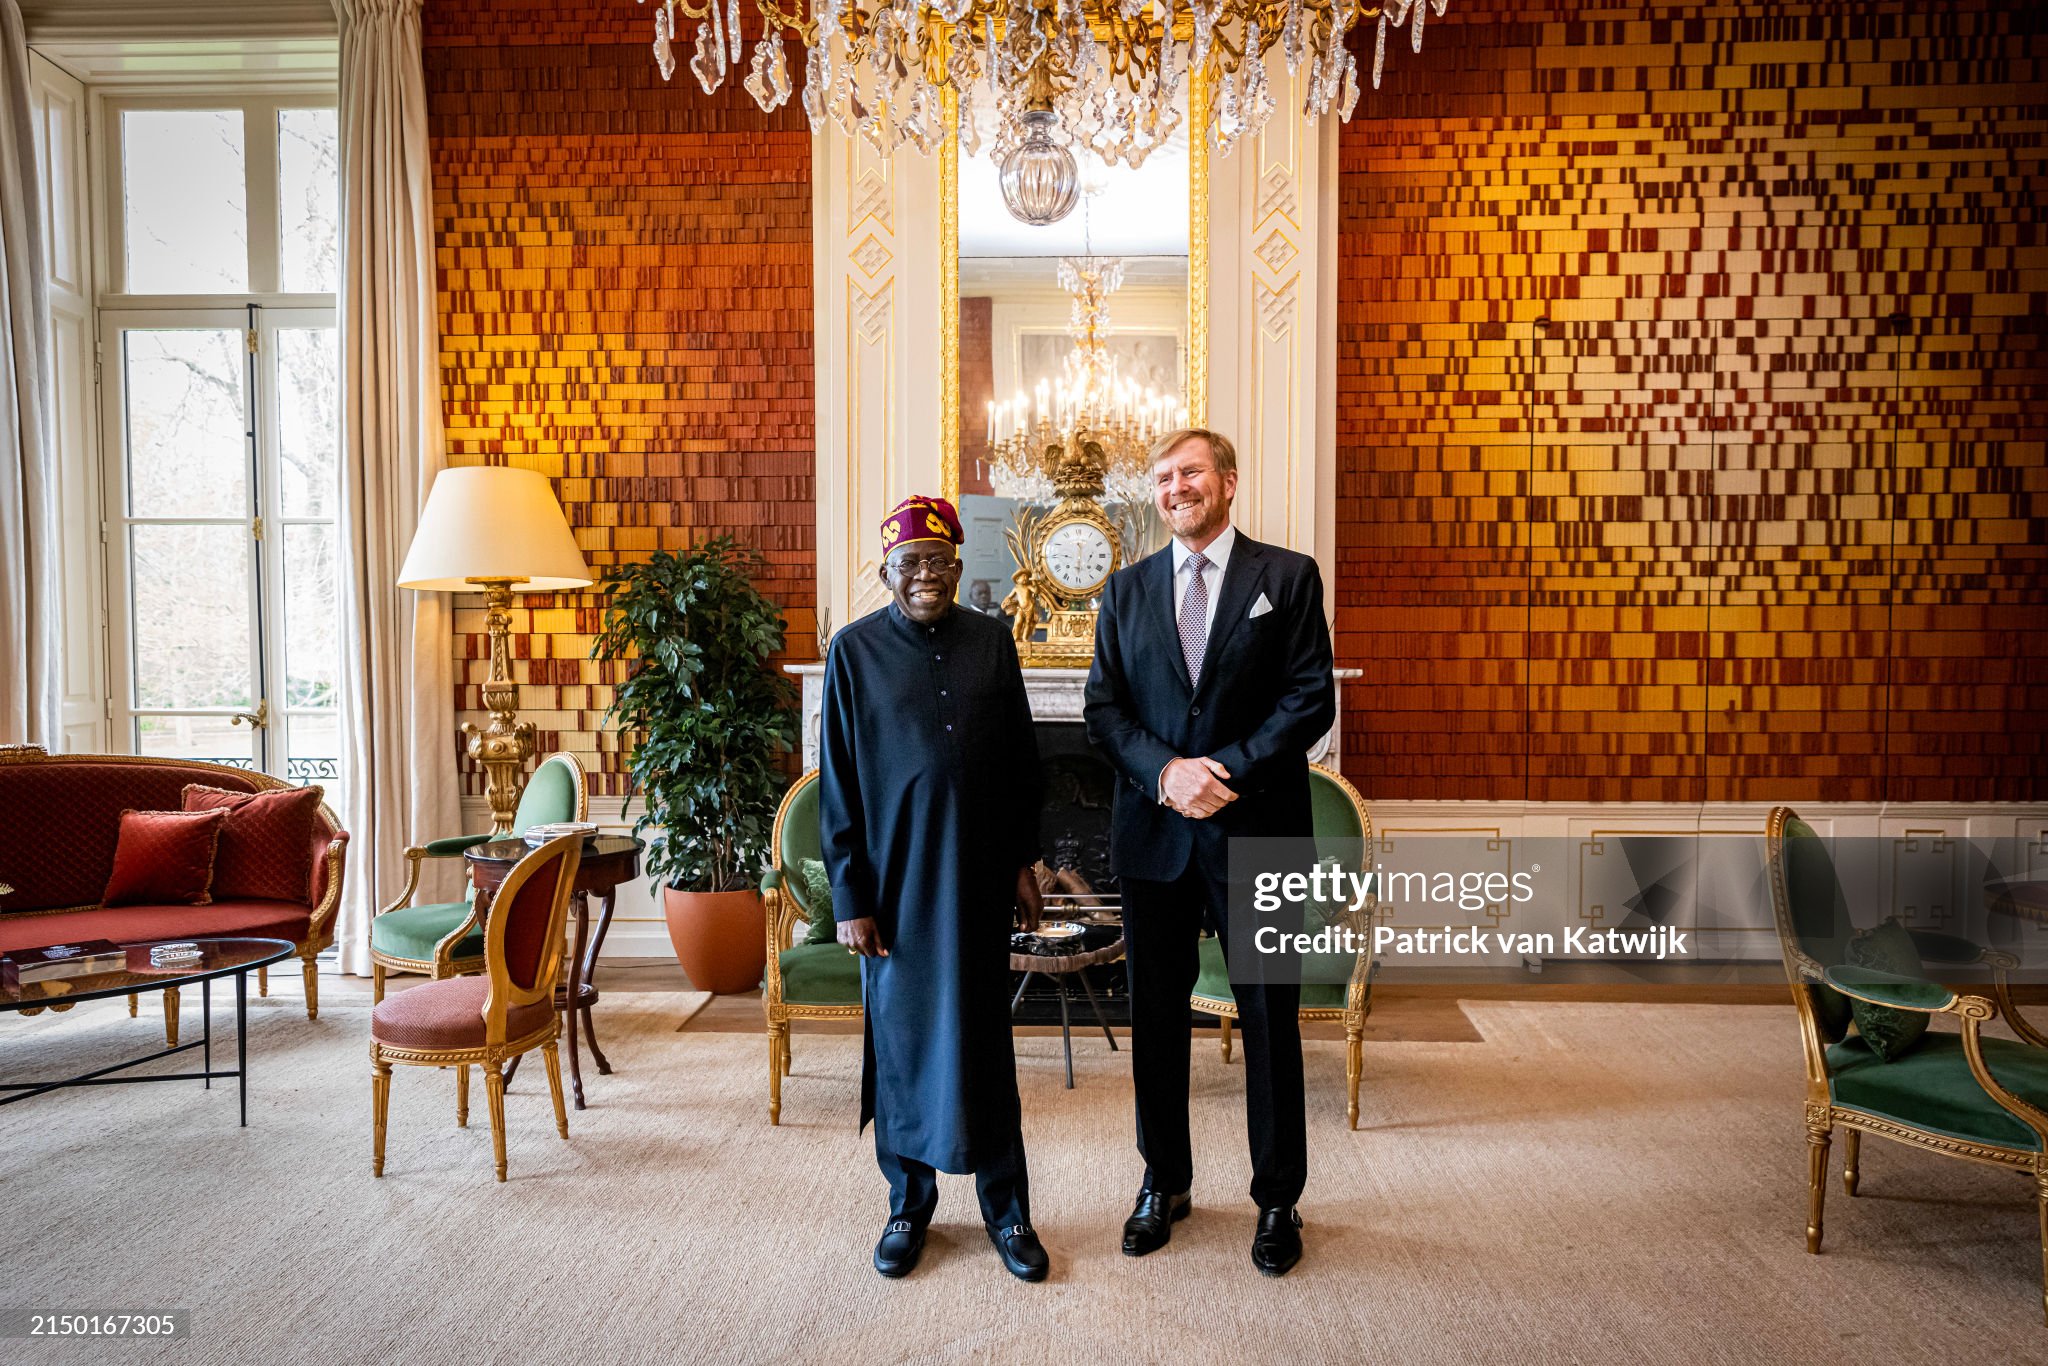 king-willem-alexander-and-queen-maxima-welcome-president-of-nigeria-at-palace-huis-ten-bosch.jpg?s=2048x2048&w=gi&k=20&c=q4KYYr2-YPIXn57DknZ1WH2a-xaXkSWPwp6sJOP6eBs=